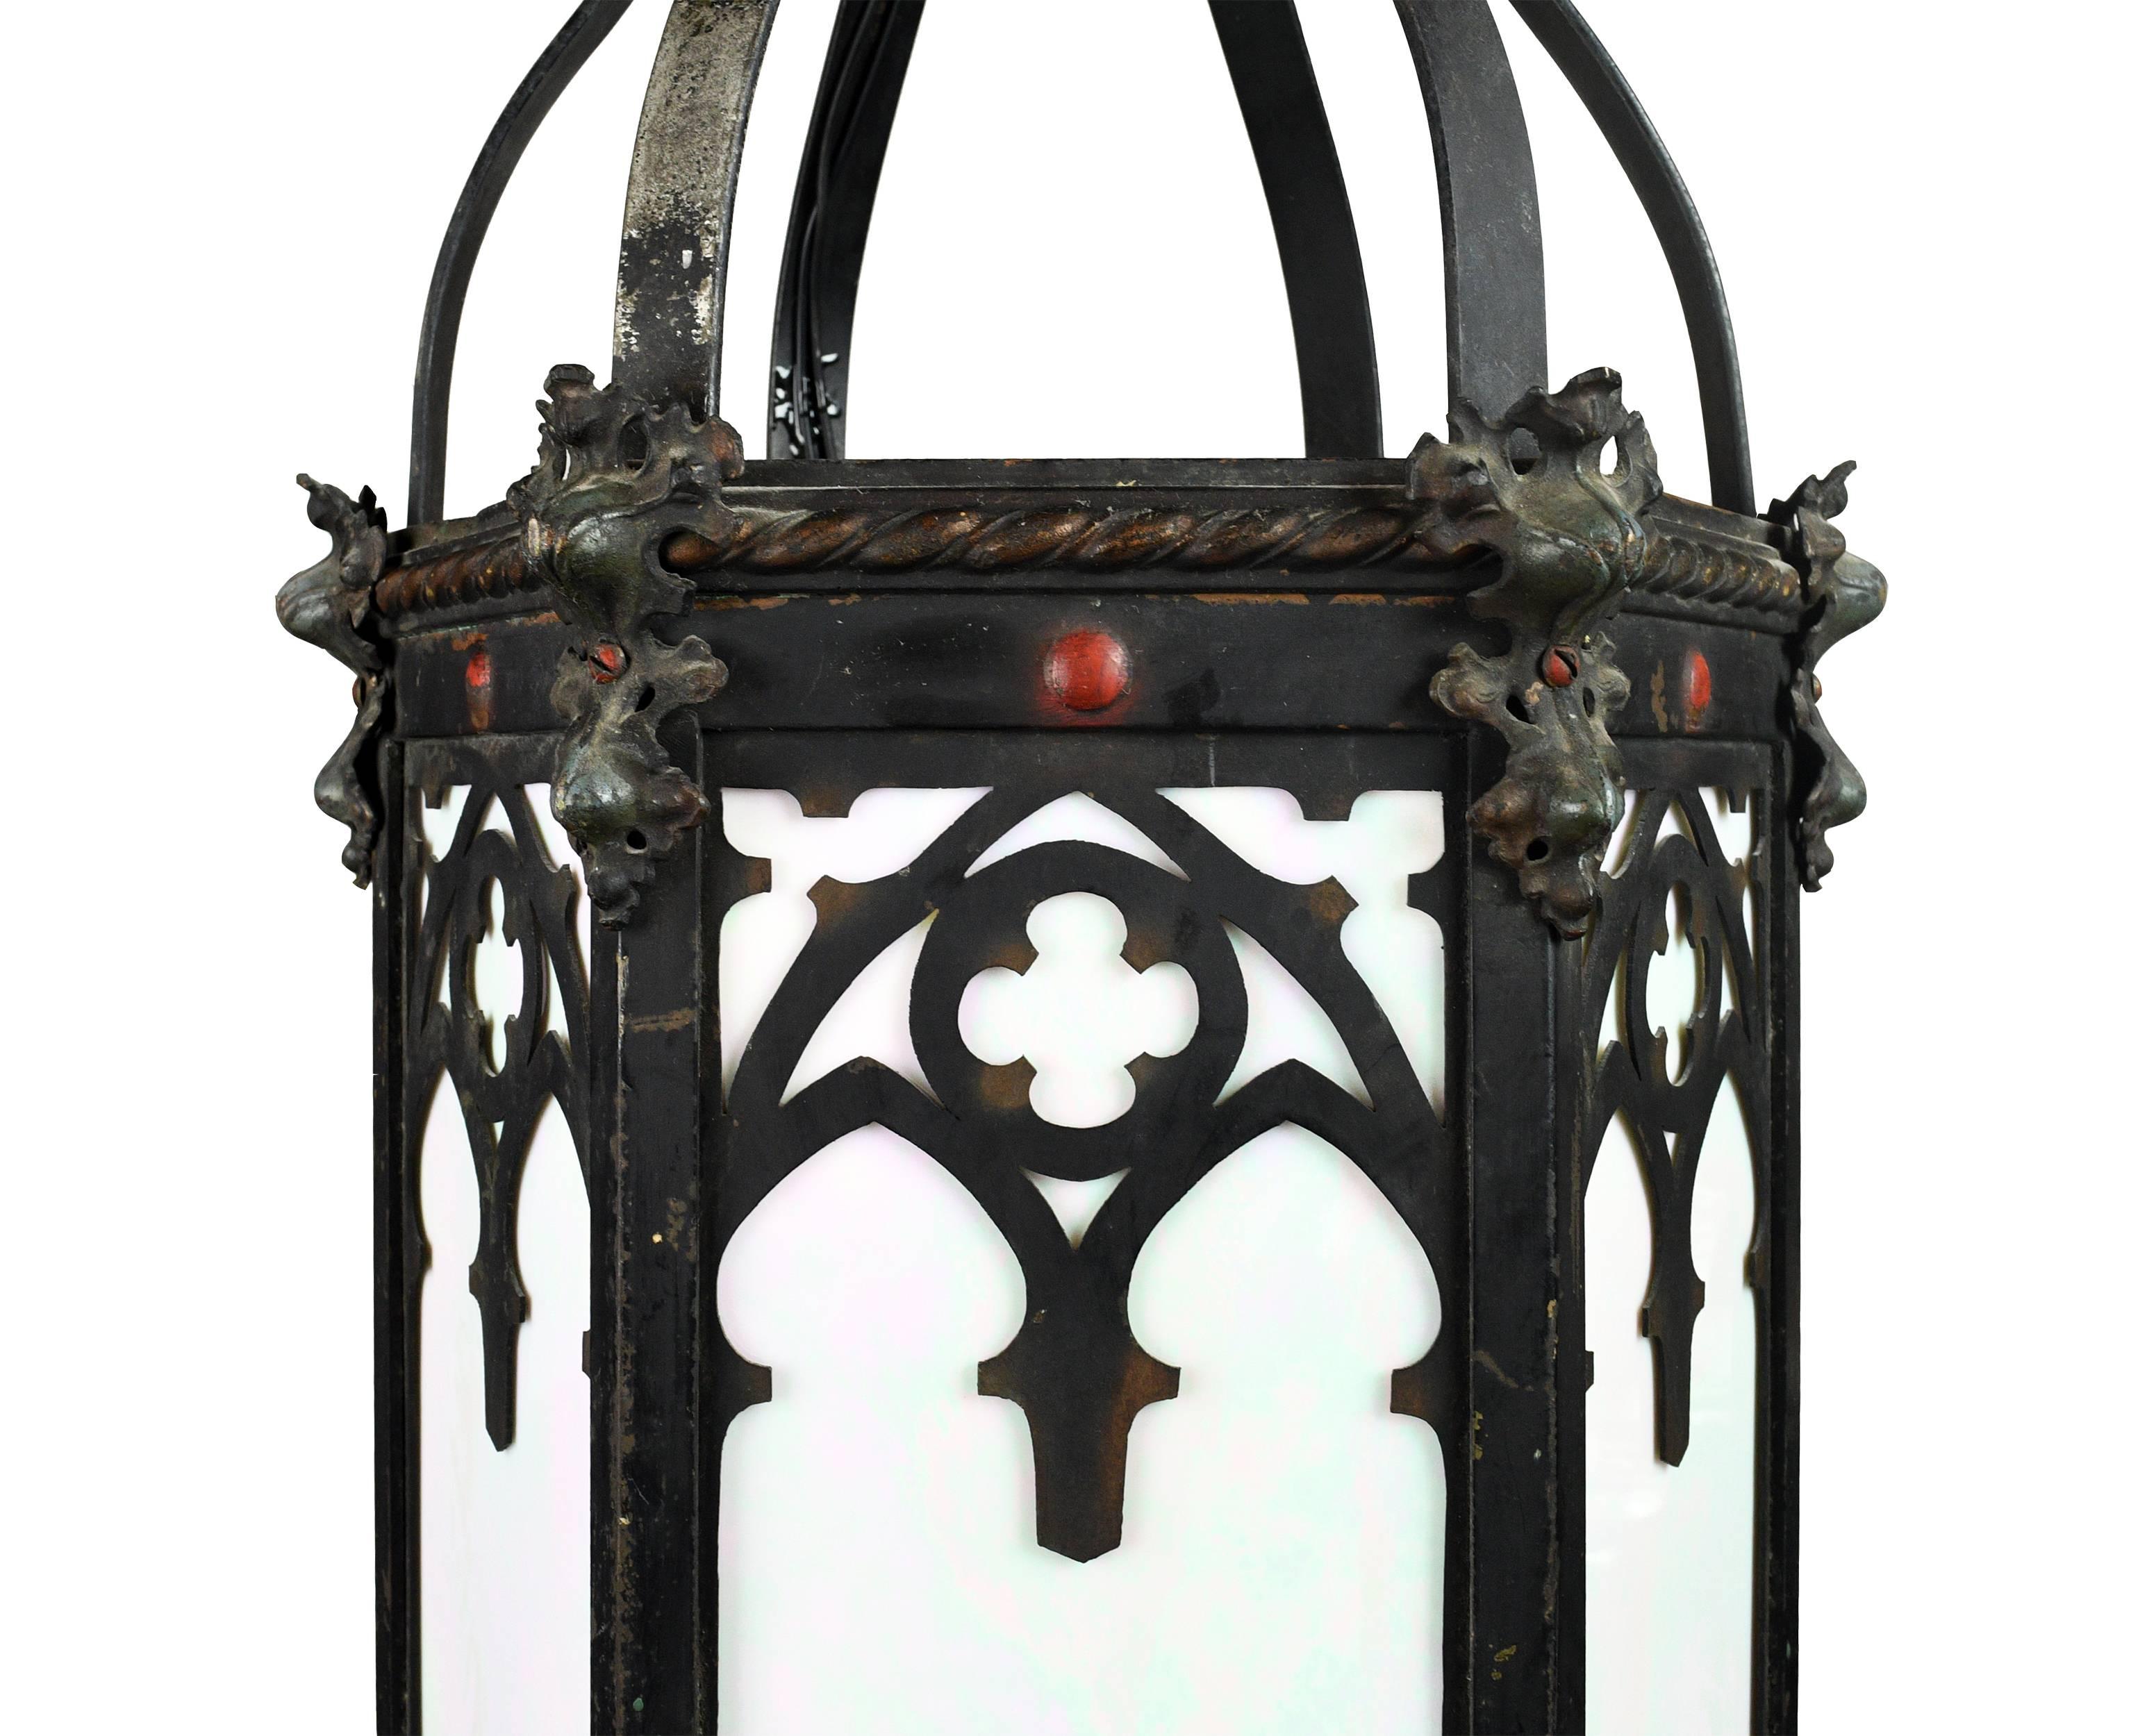 A majestic Gothic iron lantern light. The iron frame is heavy and solid with Gothic motifs on all sides of the fixture. Iridescent glass pieces are used for the shade, shimmering with pink and green hues when the light hits it just right. The heavy